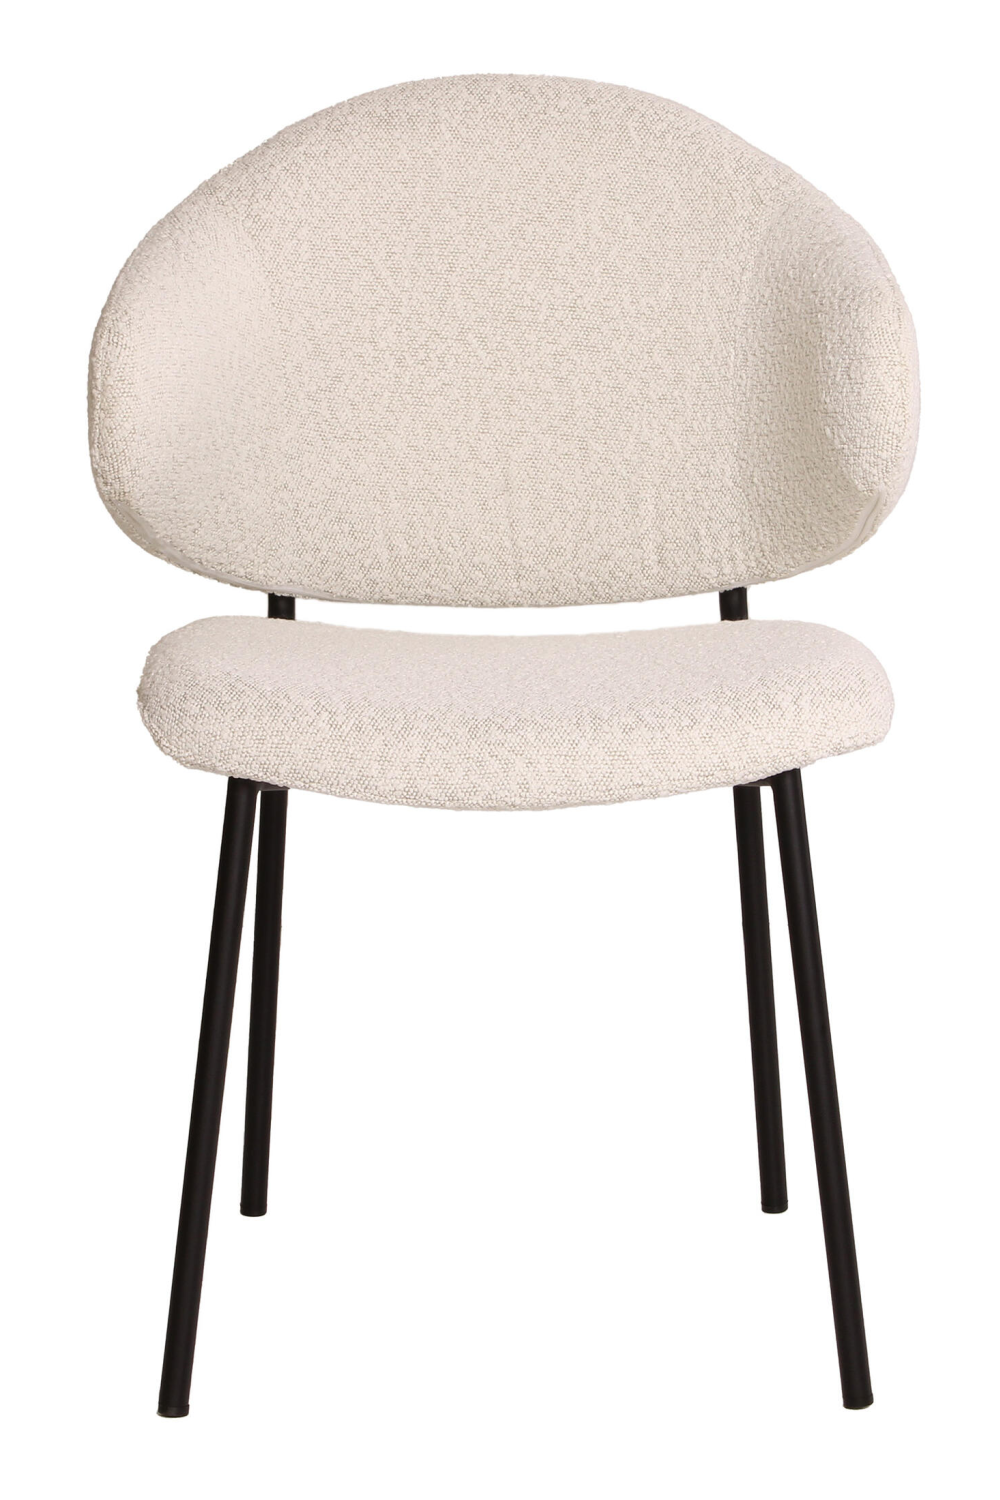 Winged Back Bouclé Dining Chair | Andrew Martin Beso | Oroa.com